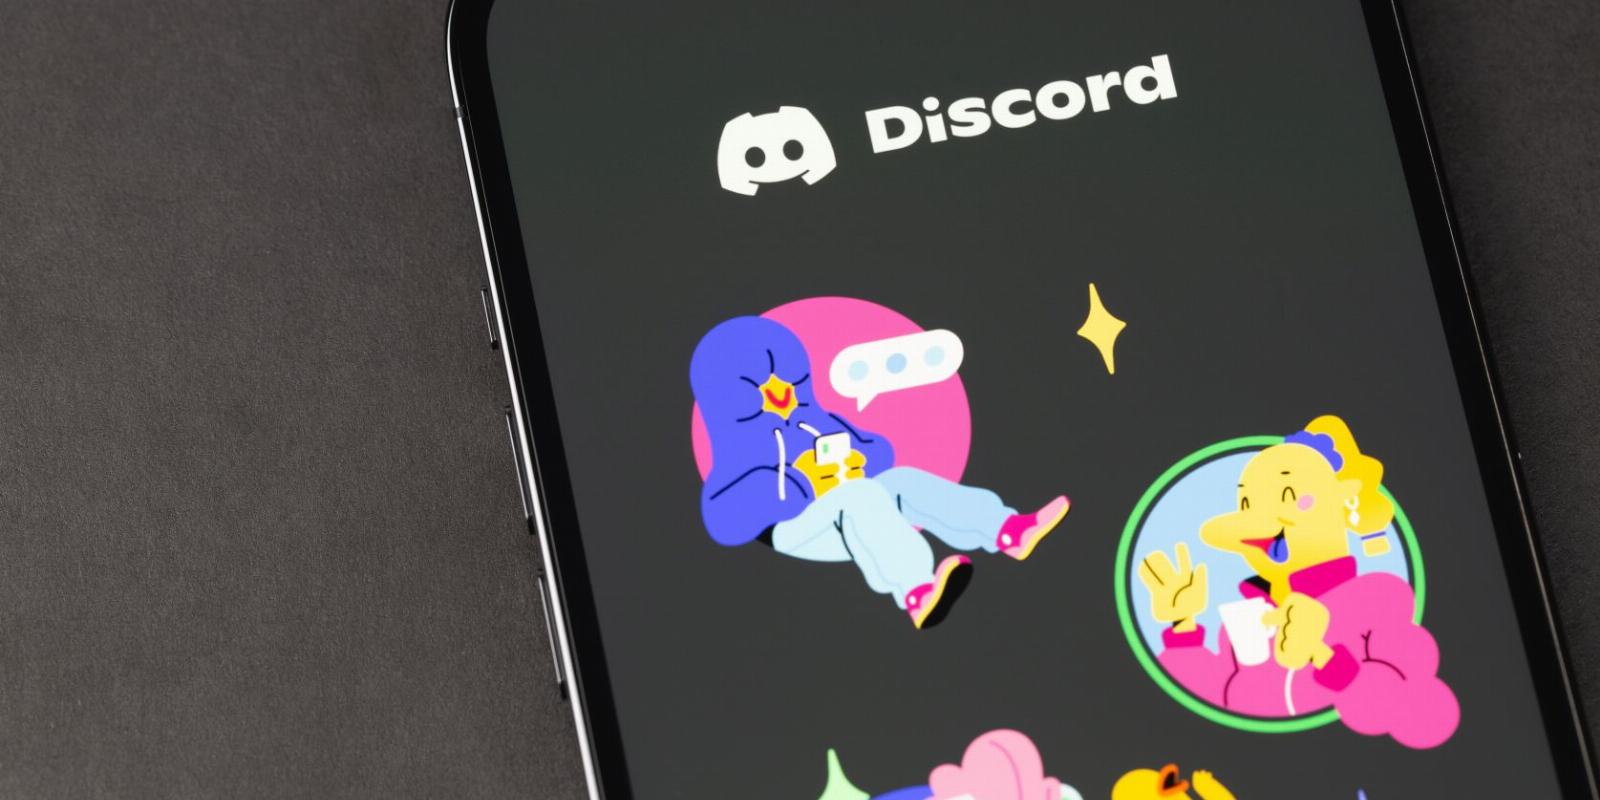 How to Add and Use Stickers on Discord